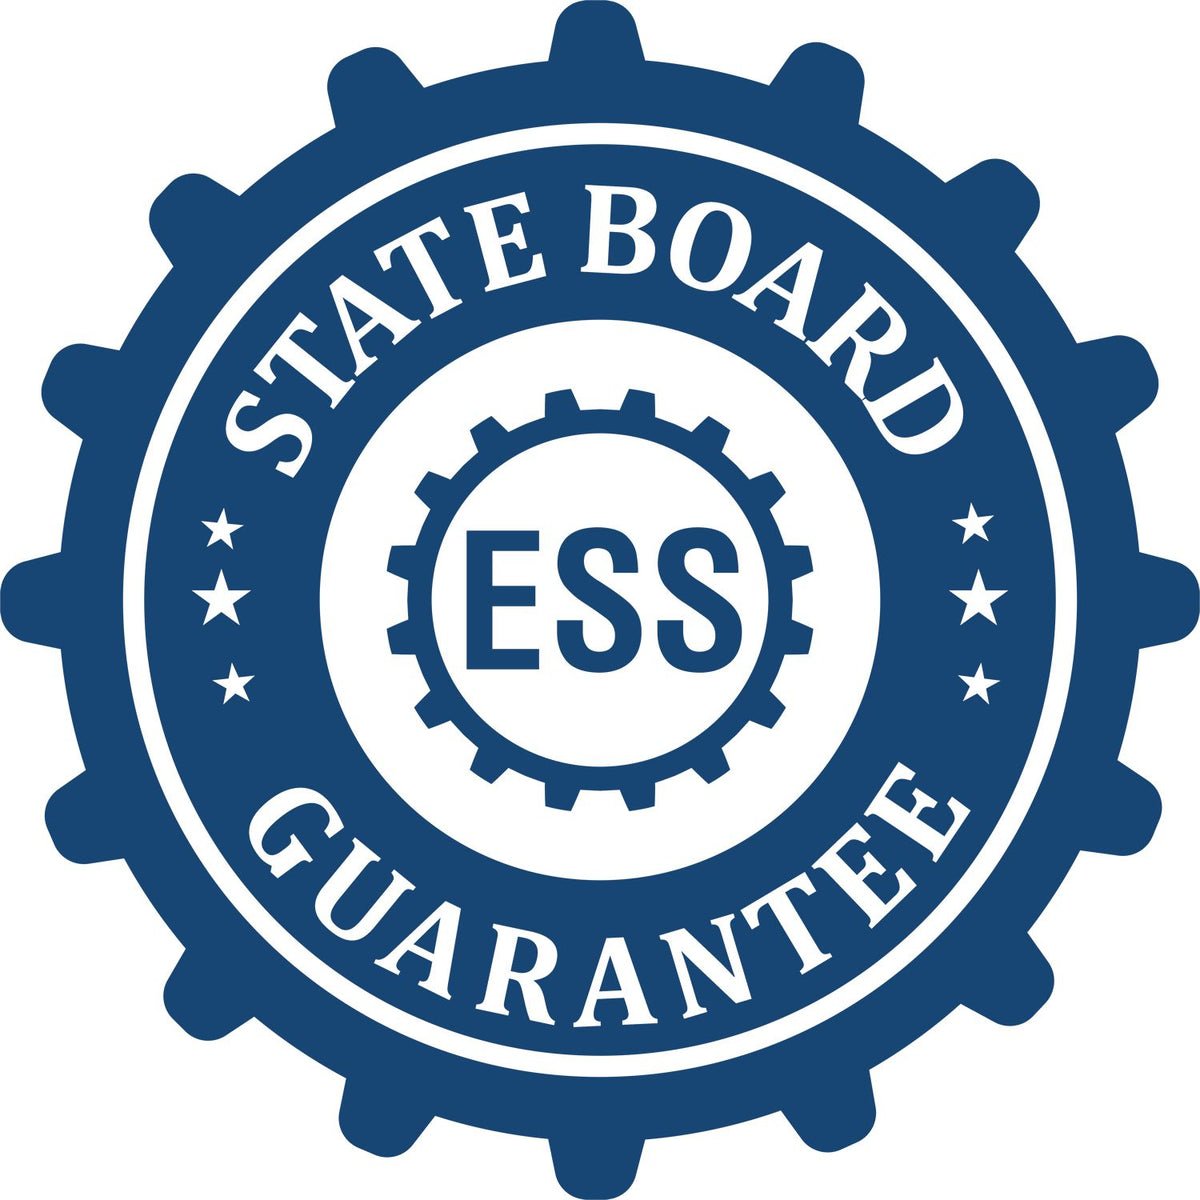 An emblem in a gear shape illustrating a state board guarantee for the Hybrid Oregon Geologist Seal